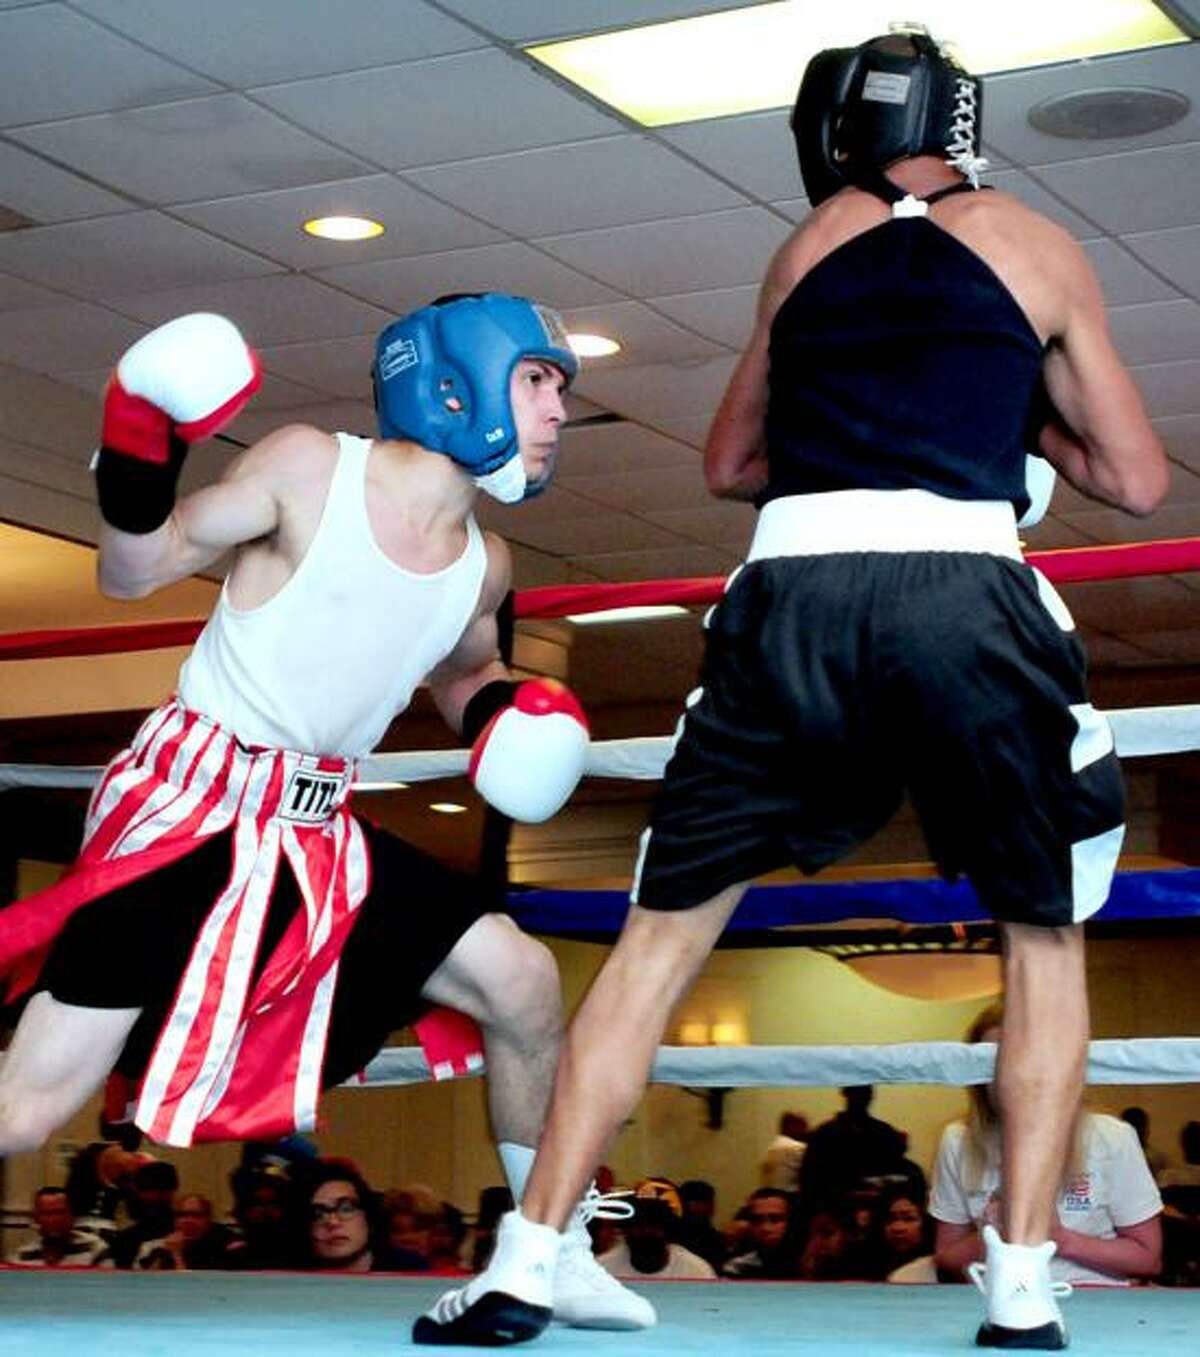 Luis Rosa (left) fights Eliza Peizoto in the Dave Solomon Fresh Air Fights in North Haven on 6/16/2012.Photo by Arnold Gold/New Haven Register AG0453C